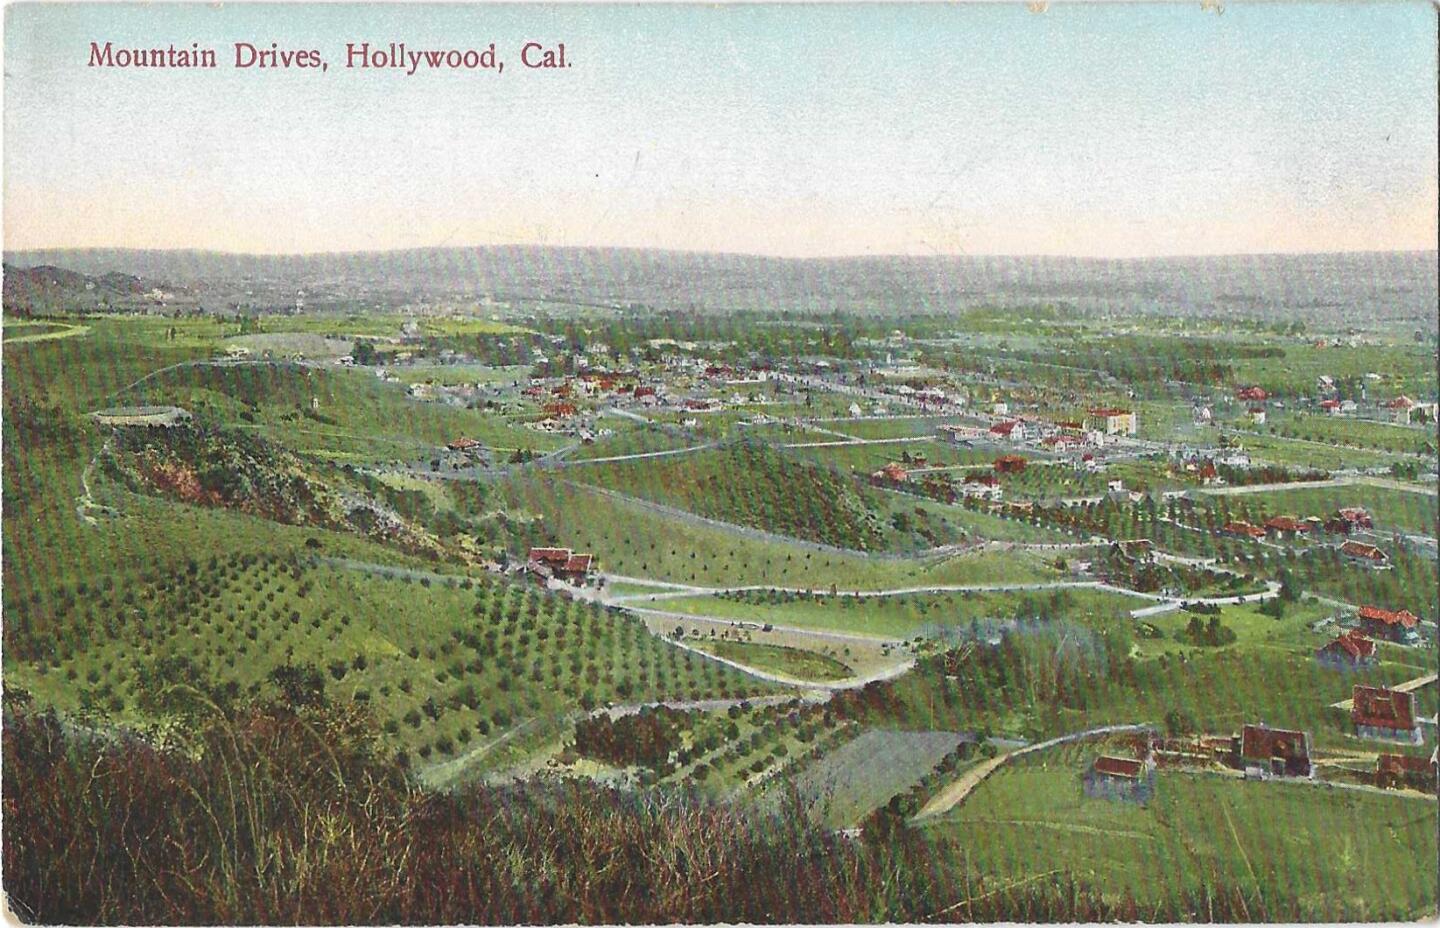 A vintage postcard shows a Hollywood with rolling green hills and a smattering of buildings